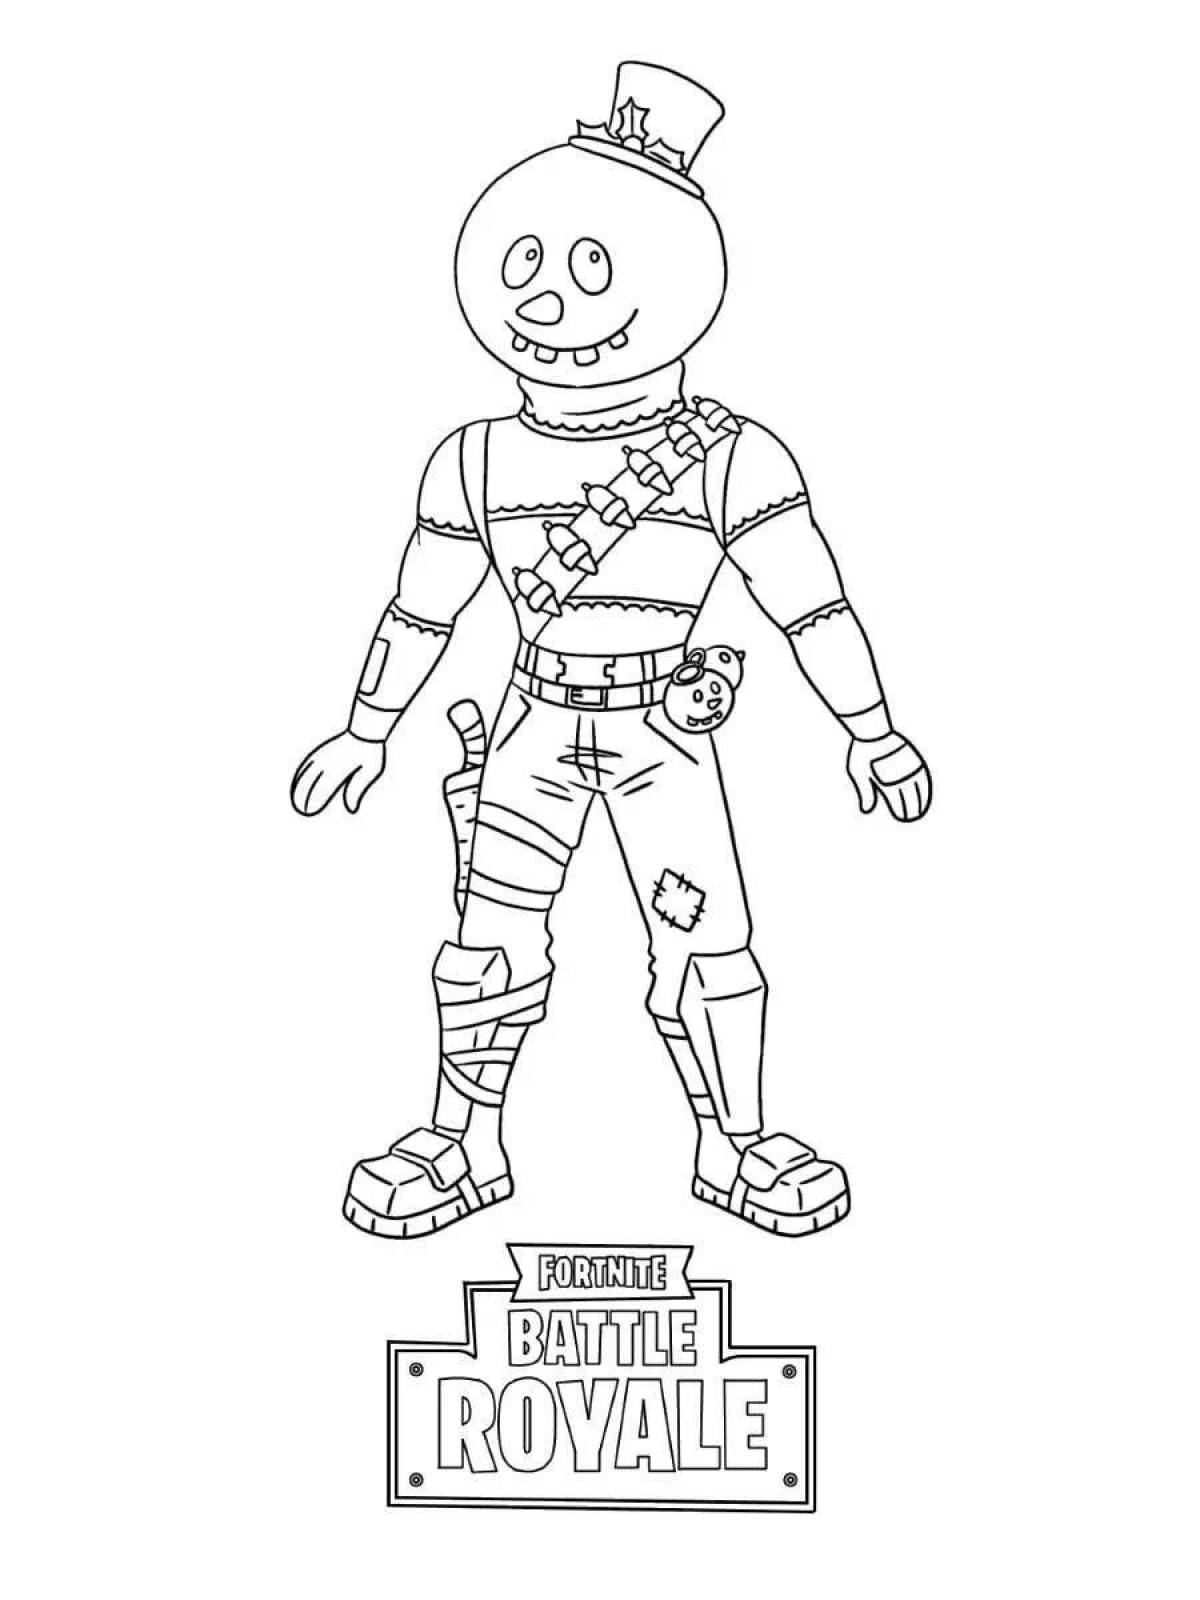 Playful fortnite coloring page for kids